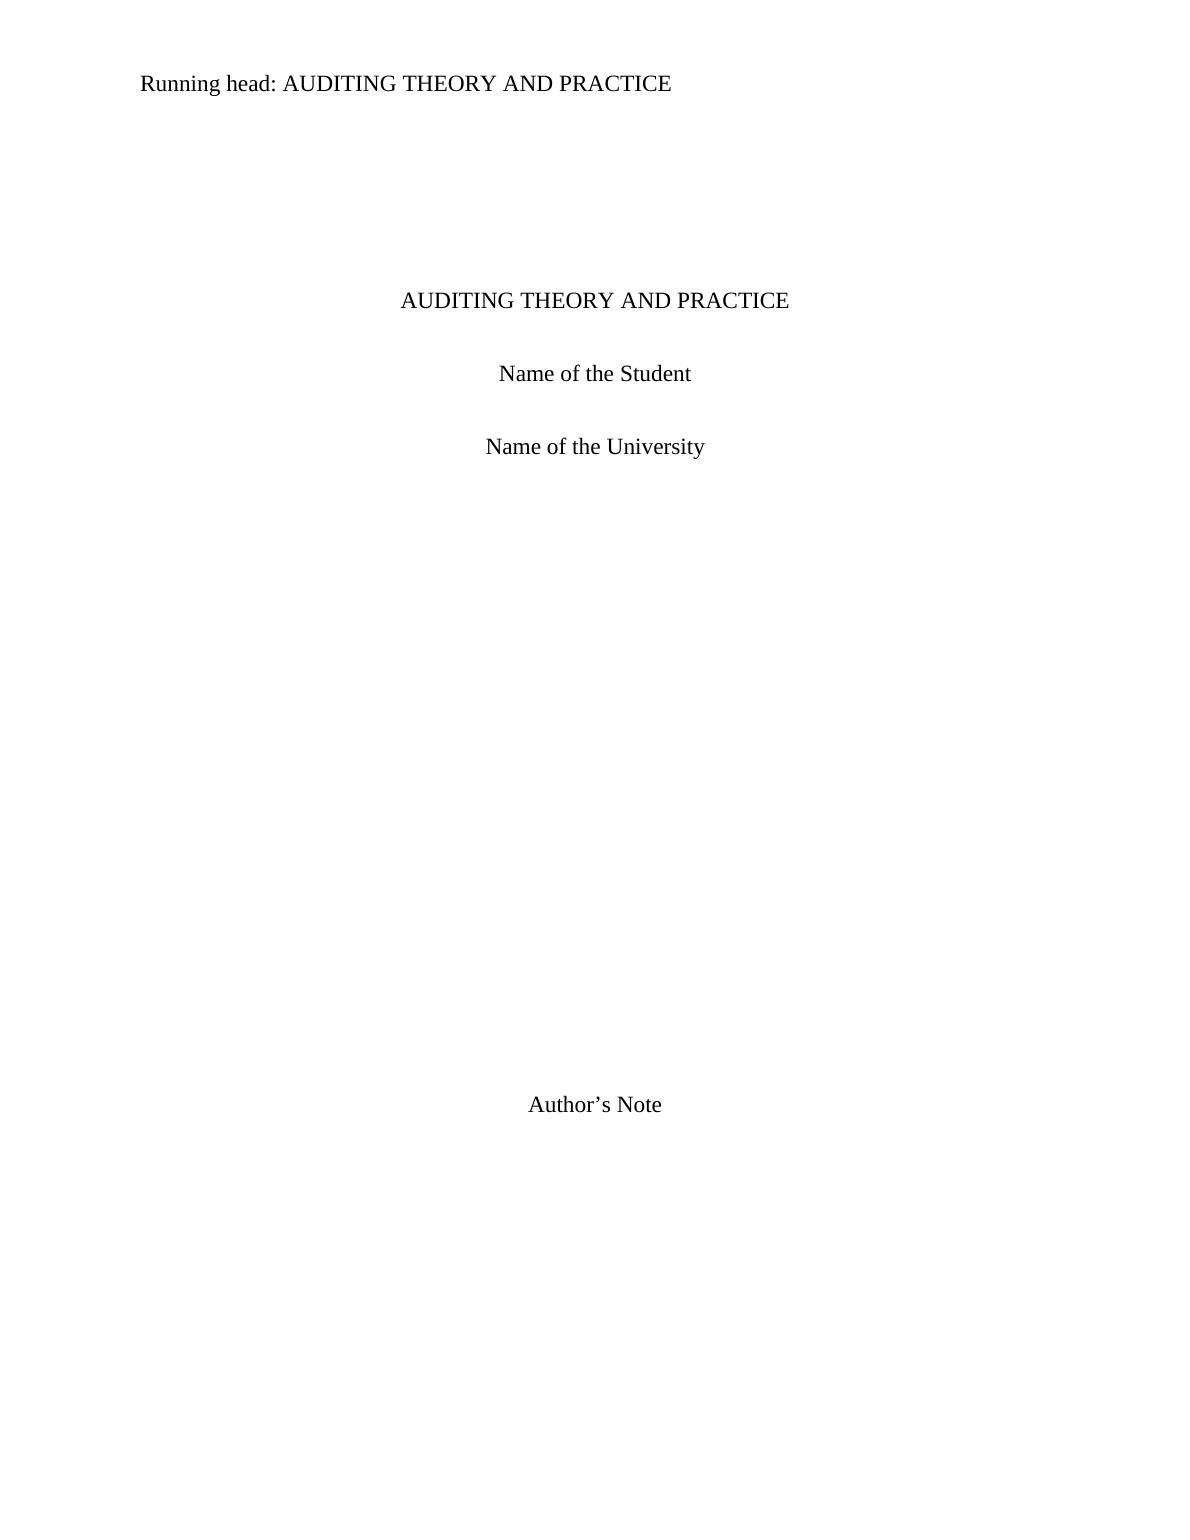 ACCT 3005 - Auditing Theory and Practice - Report_1